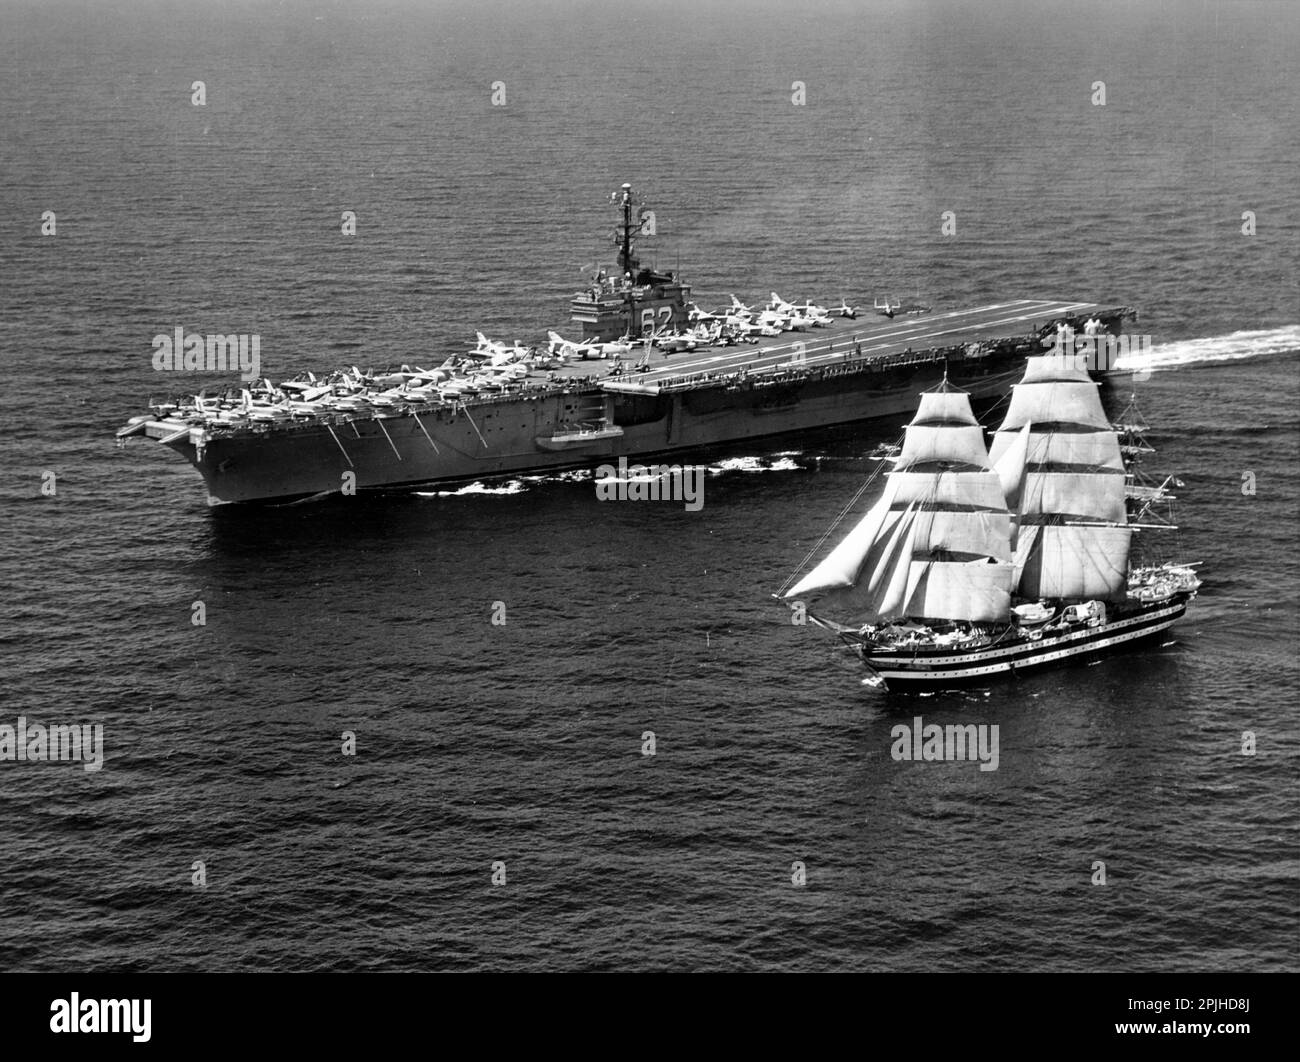 The U.S. Navy aircraft carrier USS Independence (CVA-62) underway with the Italian Marina Militare training ship Amerigo Vespucci on 12 July 1962. Independence, with assigned Carrier Air Group 7 (CVG-7), was deployed to the Mediterreanean Sea from 19 April to 27 August 1962. Stock Photo